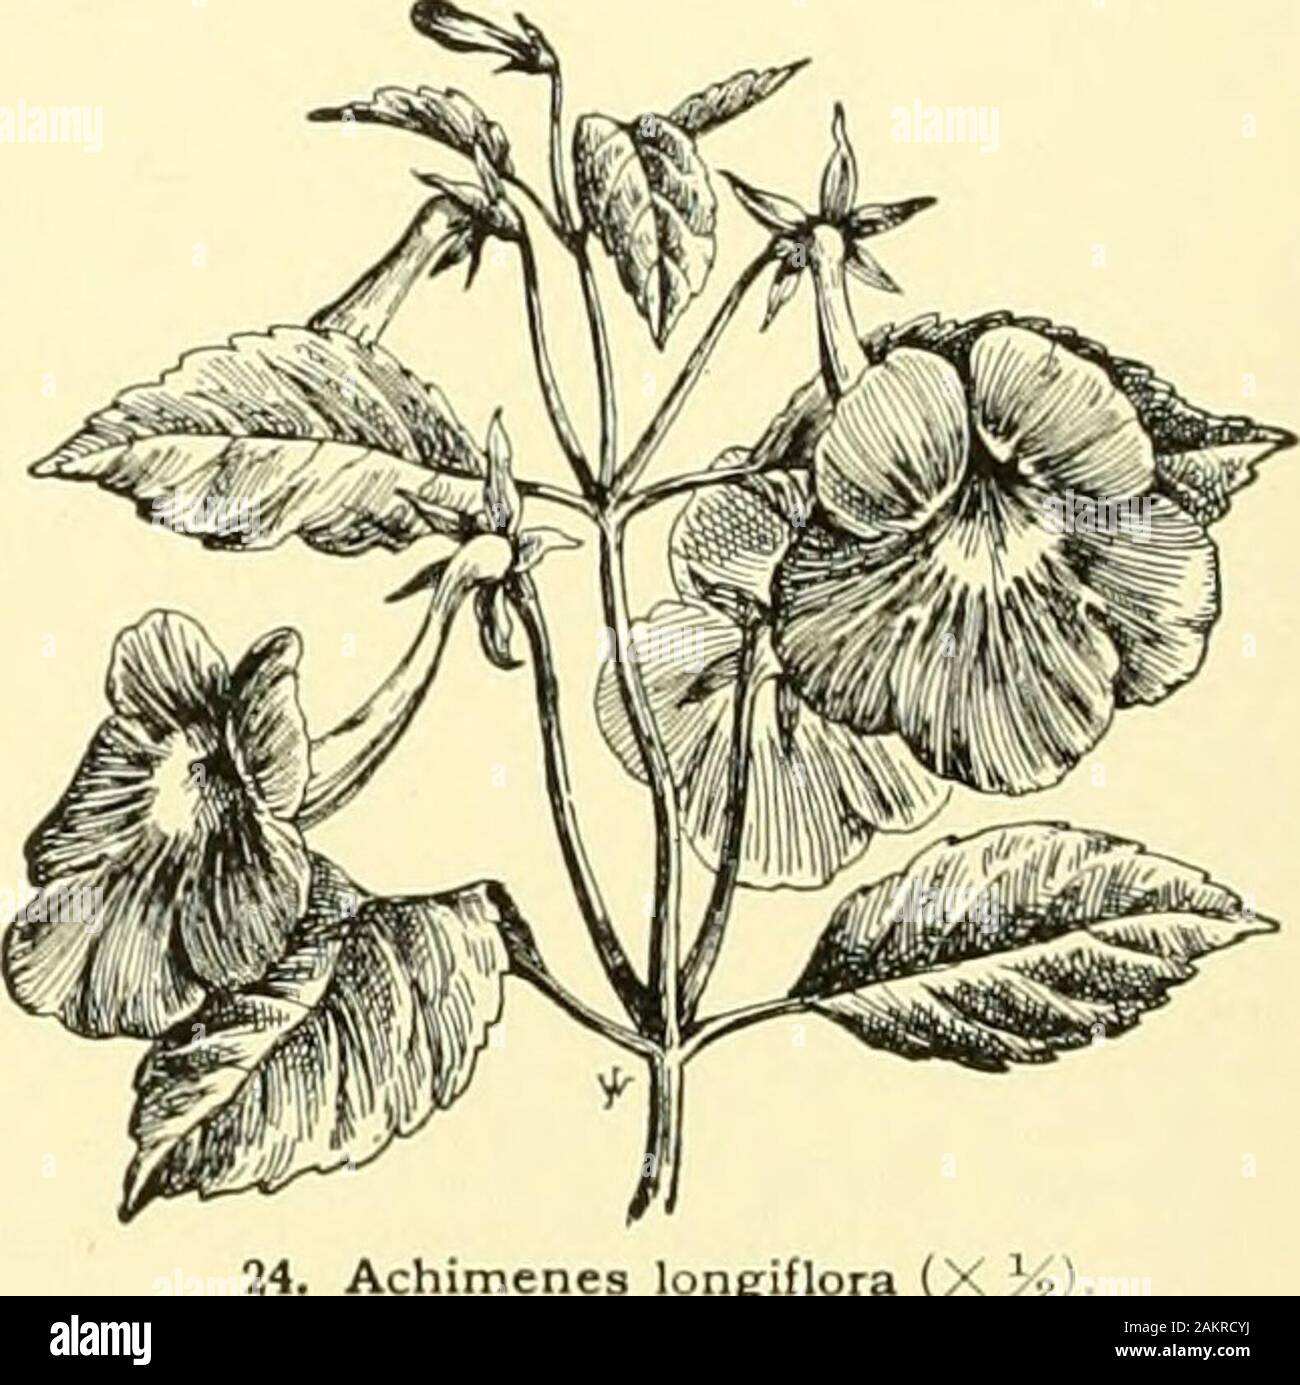 Cyclopedia of American horticulture, comprising suggestions for cultivation of horticultural plants, descriptions of the species of fruits, vegetables, flowers and ornamental plants sold in the United States and Canada, together with geographical and biographical sketches, and a synopsis of the vegetable kingdom . 23. Achimenes; tube ACHIMENES heteroph:^lla, DC. (A. ign^scens, Lem. A. Ghies^brechtii, Hort.). Root fibrous: st. 1 ft. or less, dark pur-ple, somewhat hairy: Ivs. ovate-acuminate, stalked, ser-rate, the two of each pair usually unequal in size: fls.solitary, on peduncles somewhat lo Stock Photo